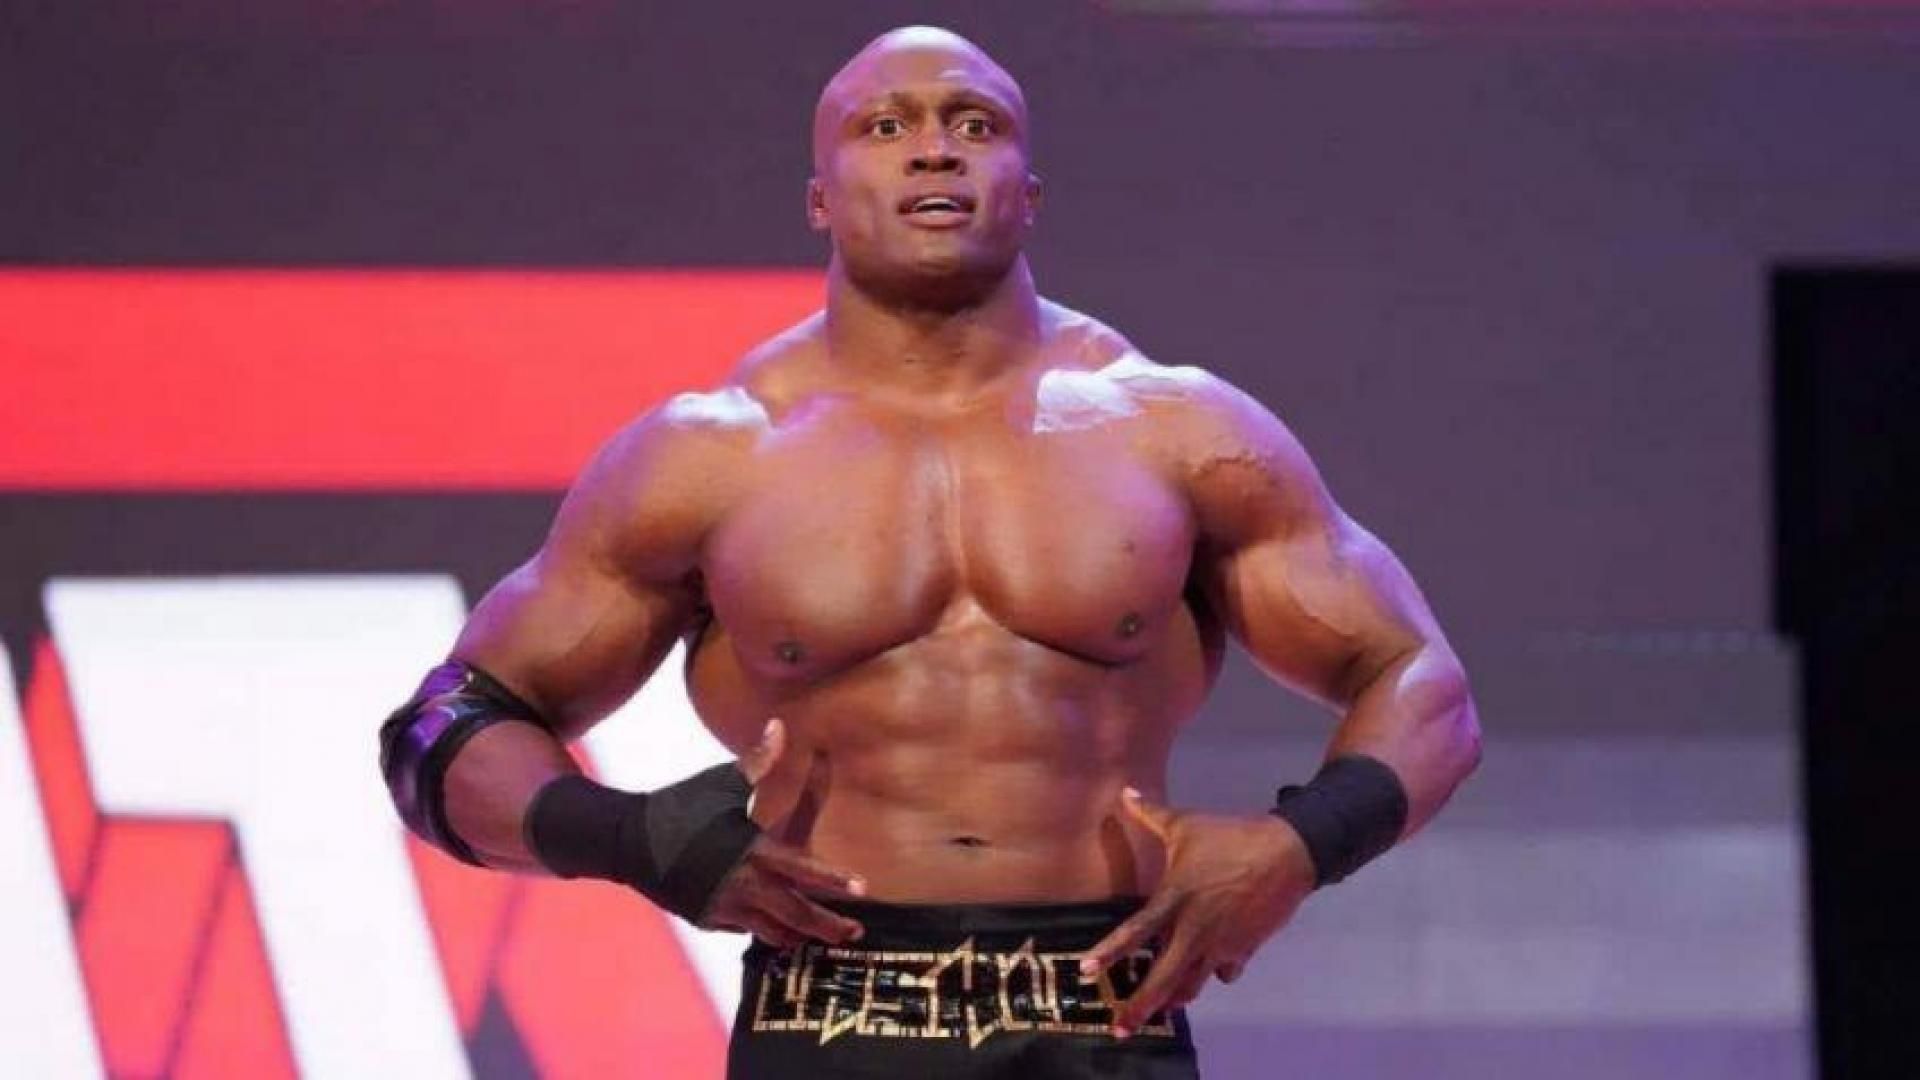 Bobby Lashley is a two-time WWE Champion